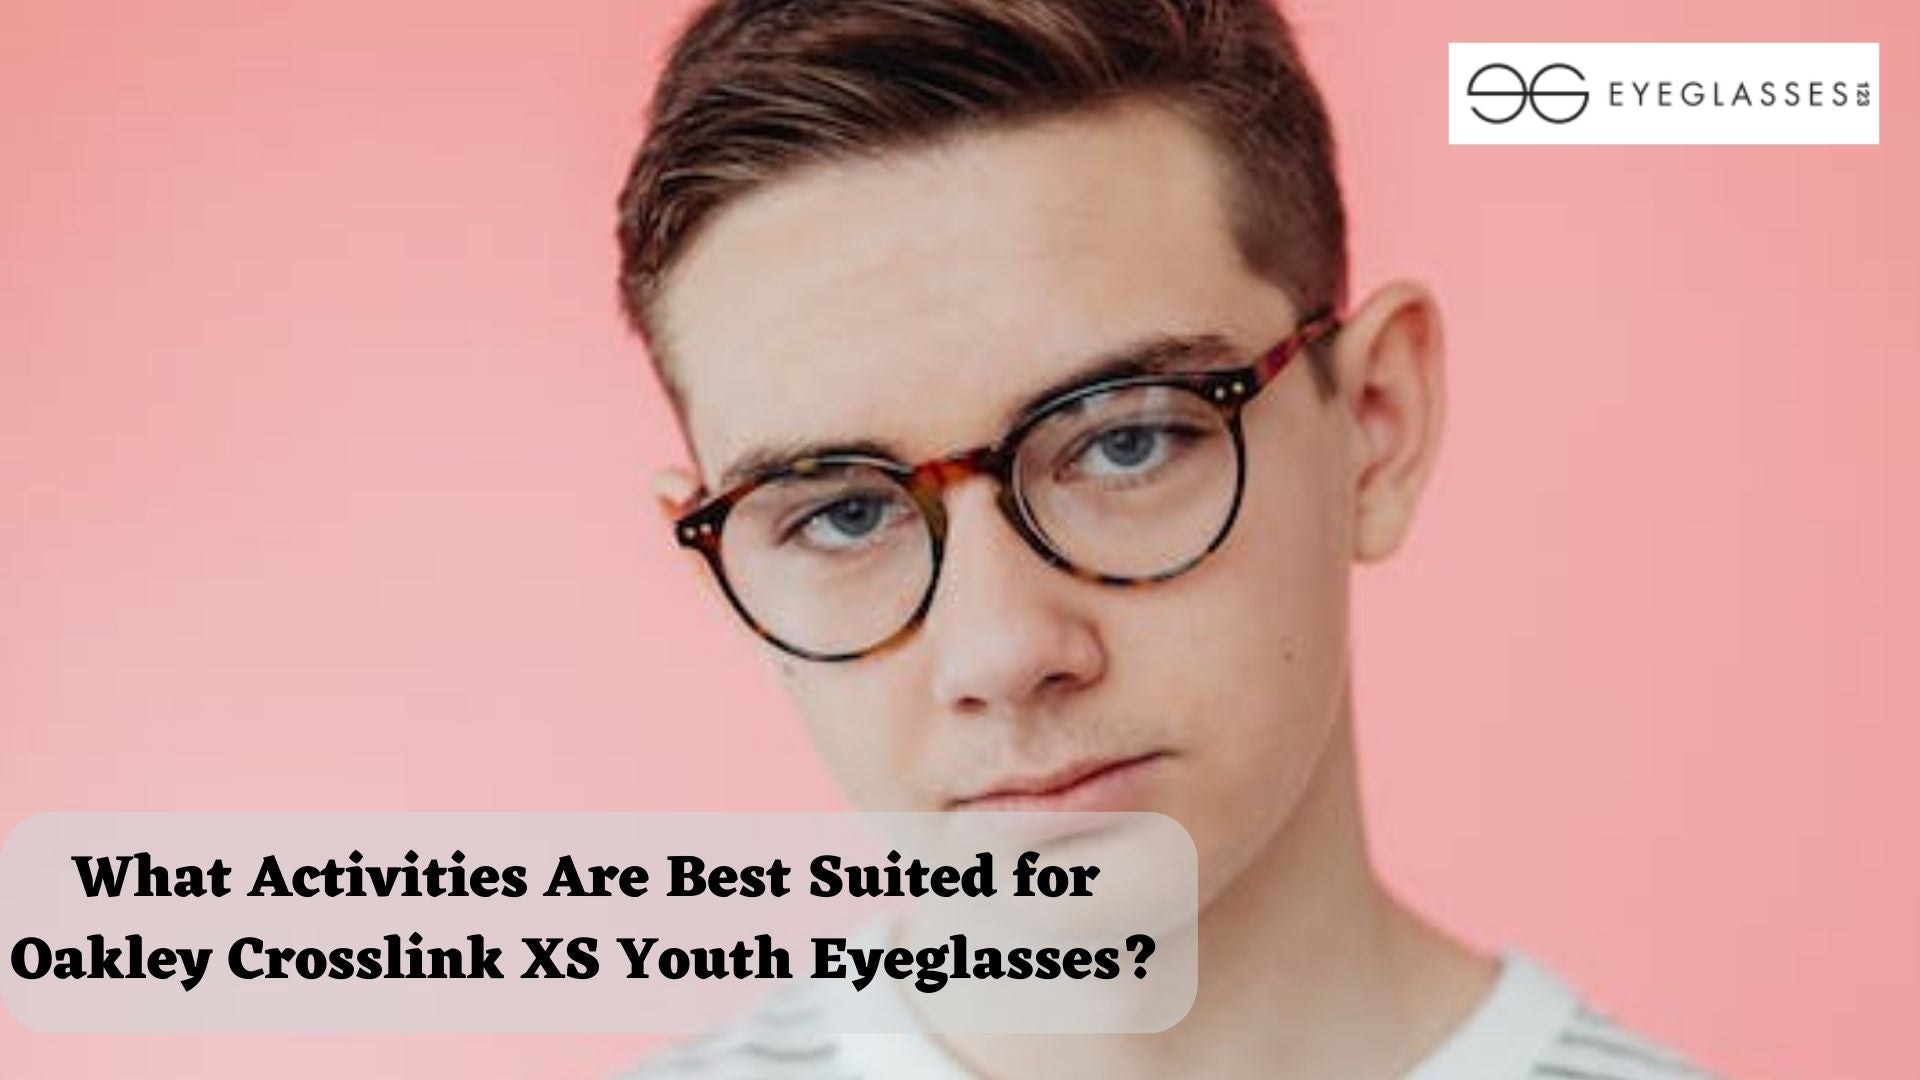 What Activities Are Best Suited for Oakley Crosslink XS Youth Eyeglasses?